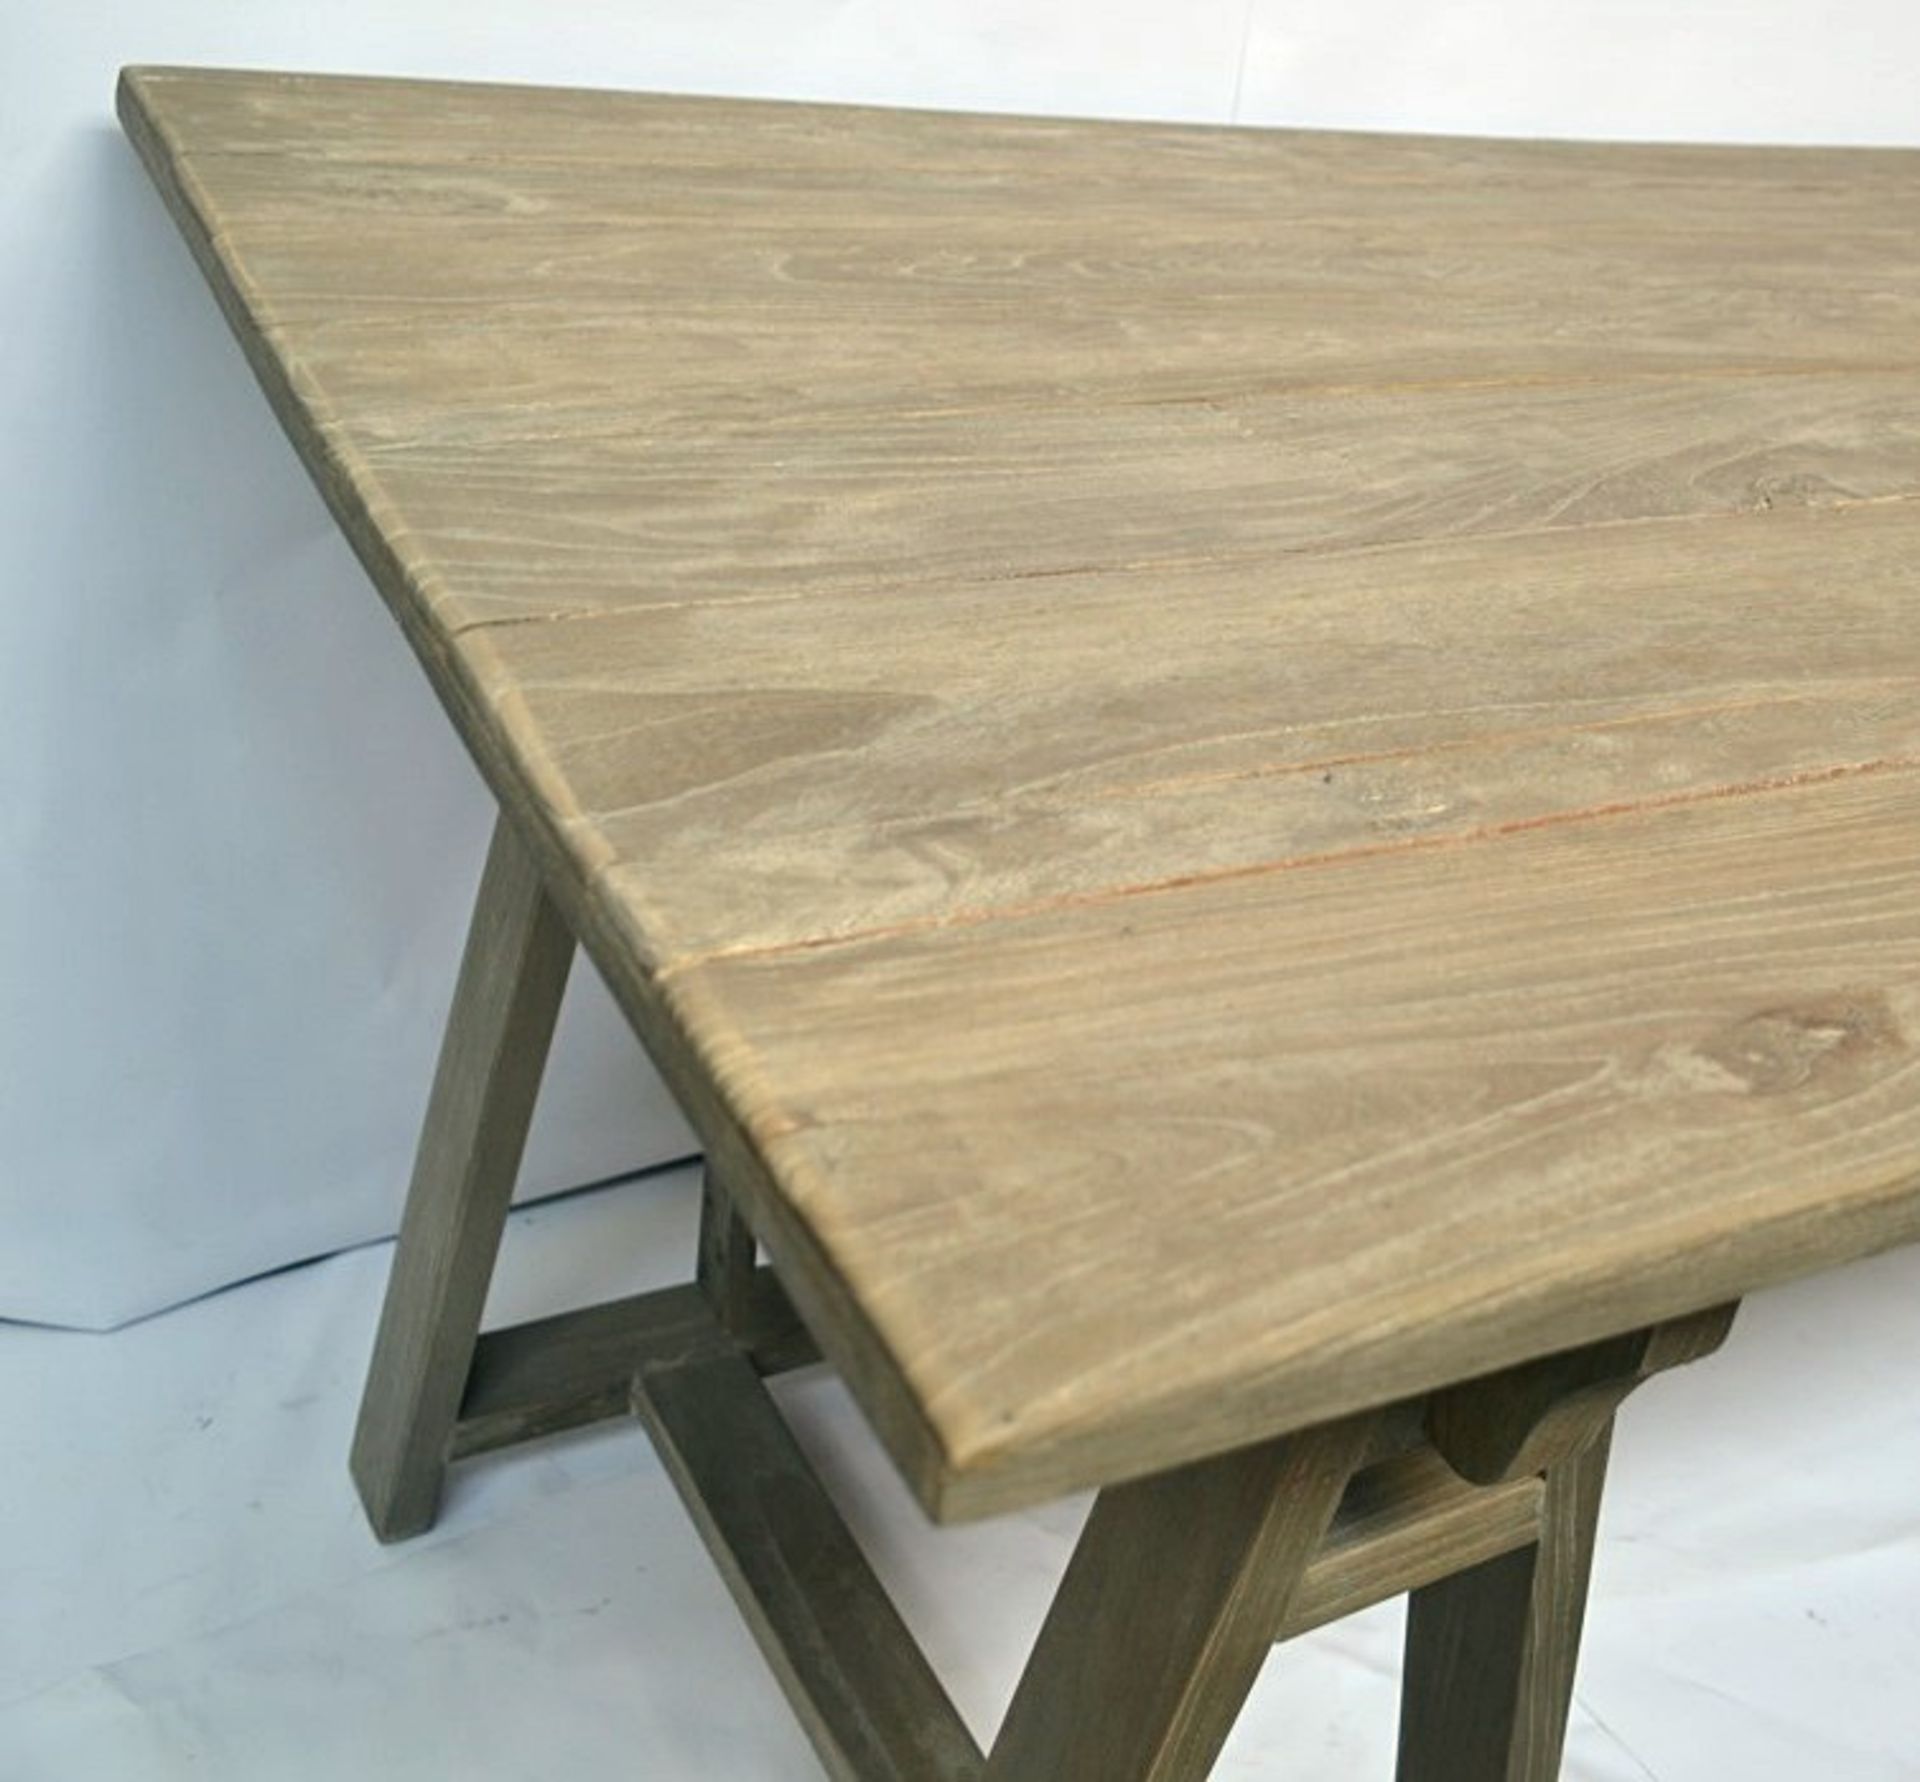 1 x FLAMANT Pelayo Dining Table - Dimensions: L180 x D92 x H76cm - Ref: 4643711 - CL087 - - Image 5 of 6